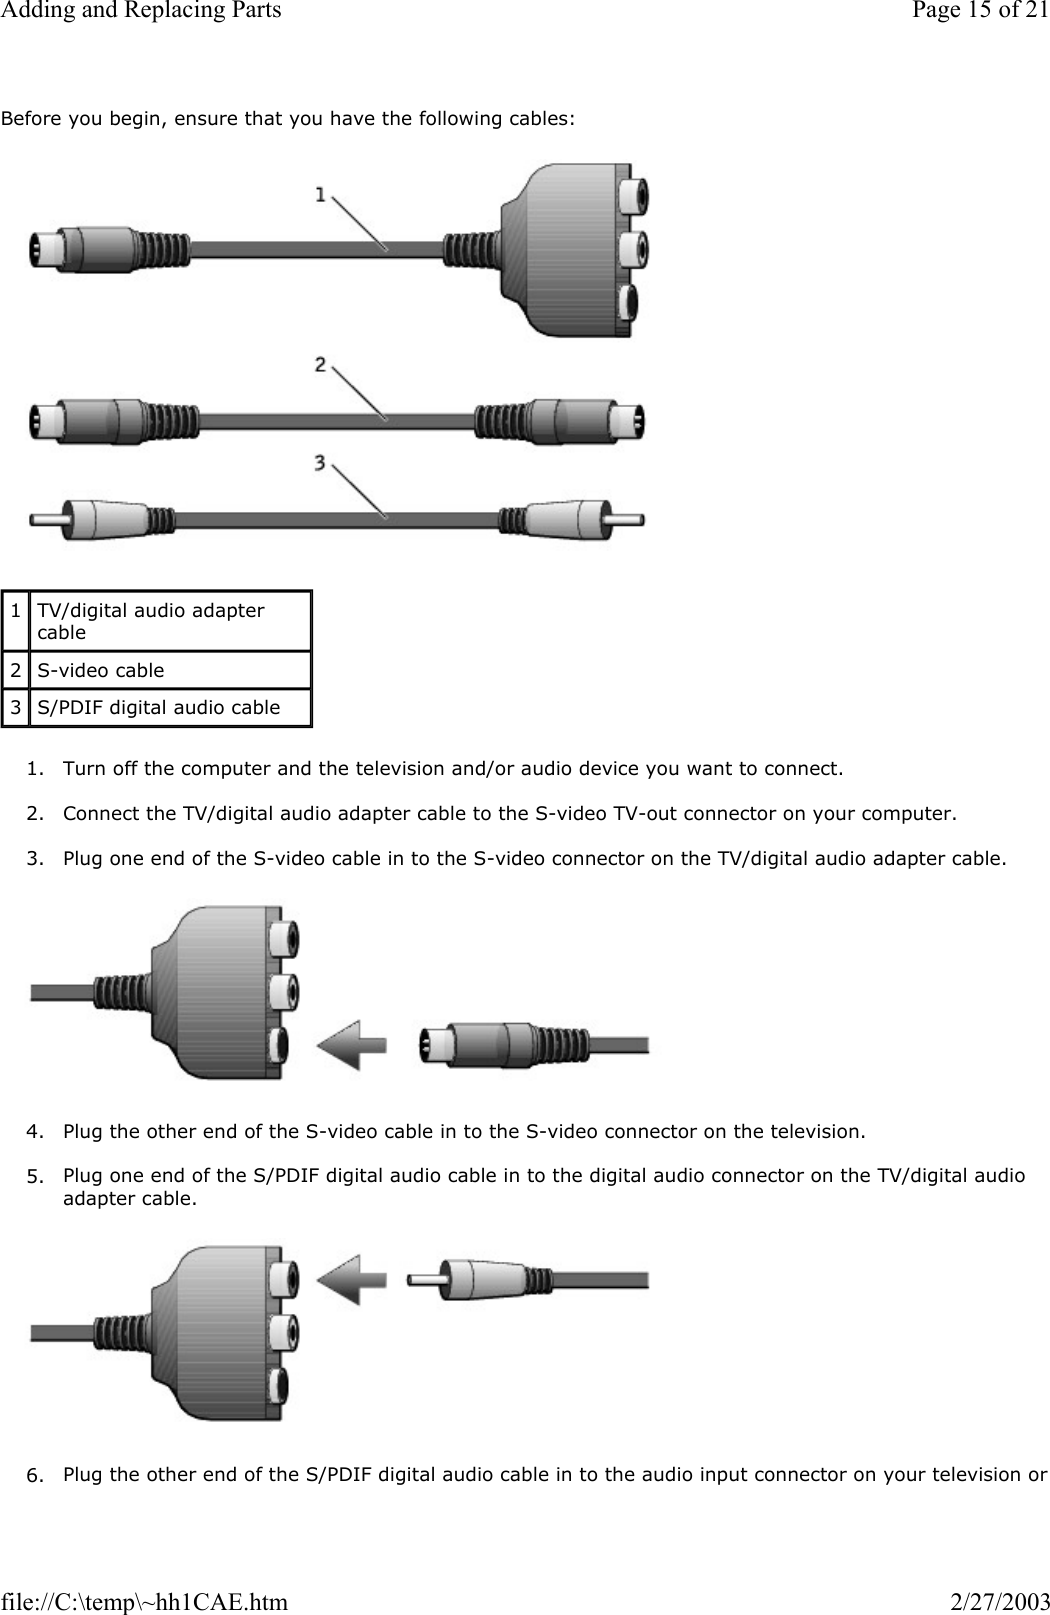 Before you begin, ensure that you have the following cables:   1. Turn off the computer and the television and/or audio device you want to connect.  2. Connect the TV/digital audio adapter cable to the S-video TV-out connector on your computer.  3. Plug one end of the S-video cable in to the S-video connector on the TV/digital audio adapter cable.    4. Plug the other end of the S-video cable in to the S-video connector on the television.  5. Plug one end of the S/PDIF digital audio cable in to the digital audio connector on the TV/digital audio adapter cable.    6. Plug the other end of the S/PDIF digital audio cable in to the audio input connector on your television or 1  TV/digital audio adapter cable 2  S-video cable 3  S/PDIF digital audio cable Page 15 of 21Adding and Replacing Parts2/27/2003file://C:\temp\~hh1CAE.htm